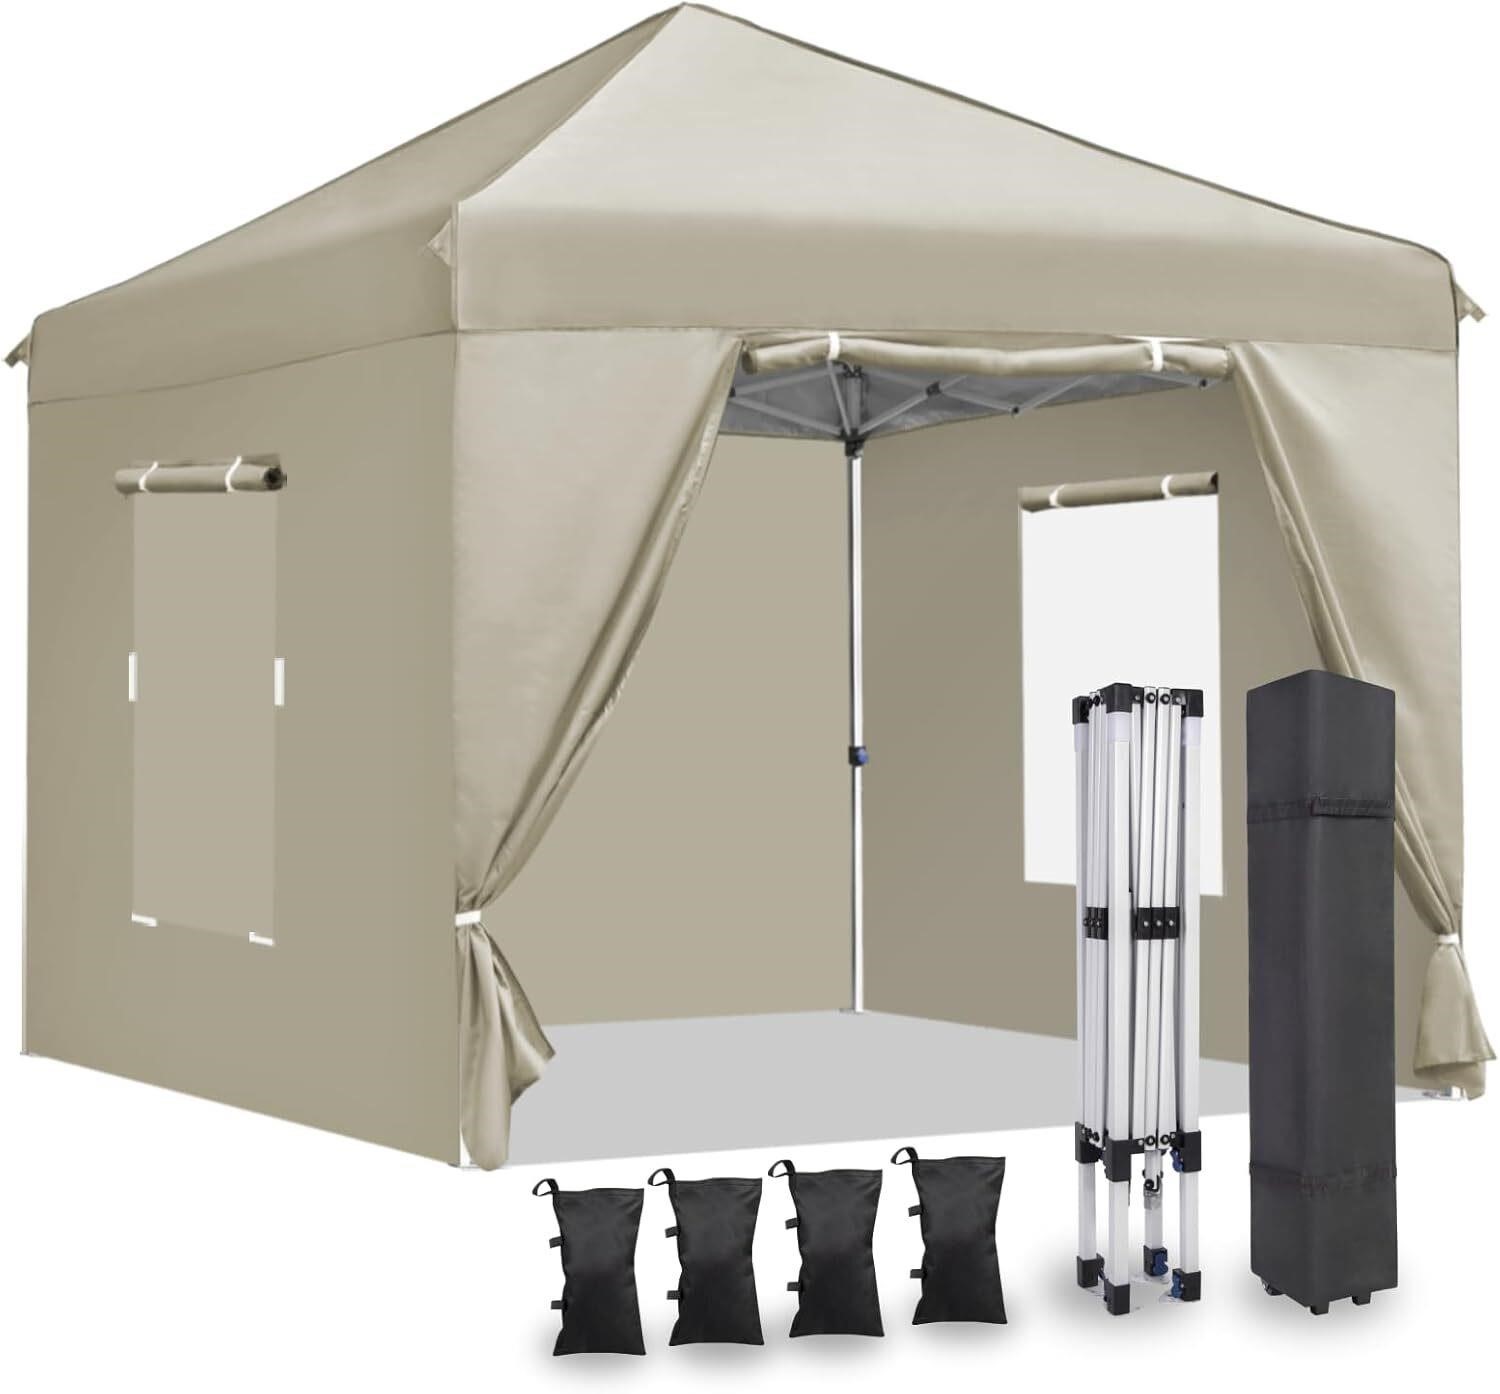 10'x10' Pop Up Canopy Tent with 4 Sidewalls